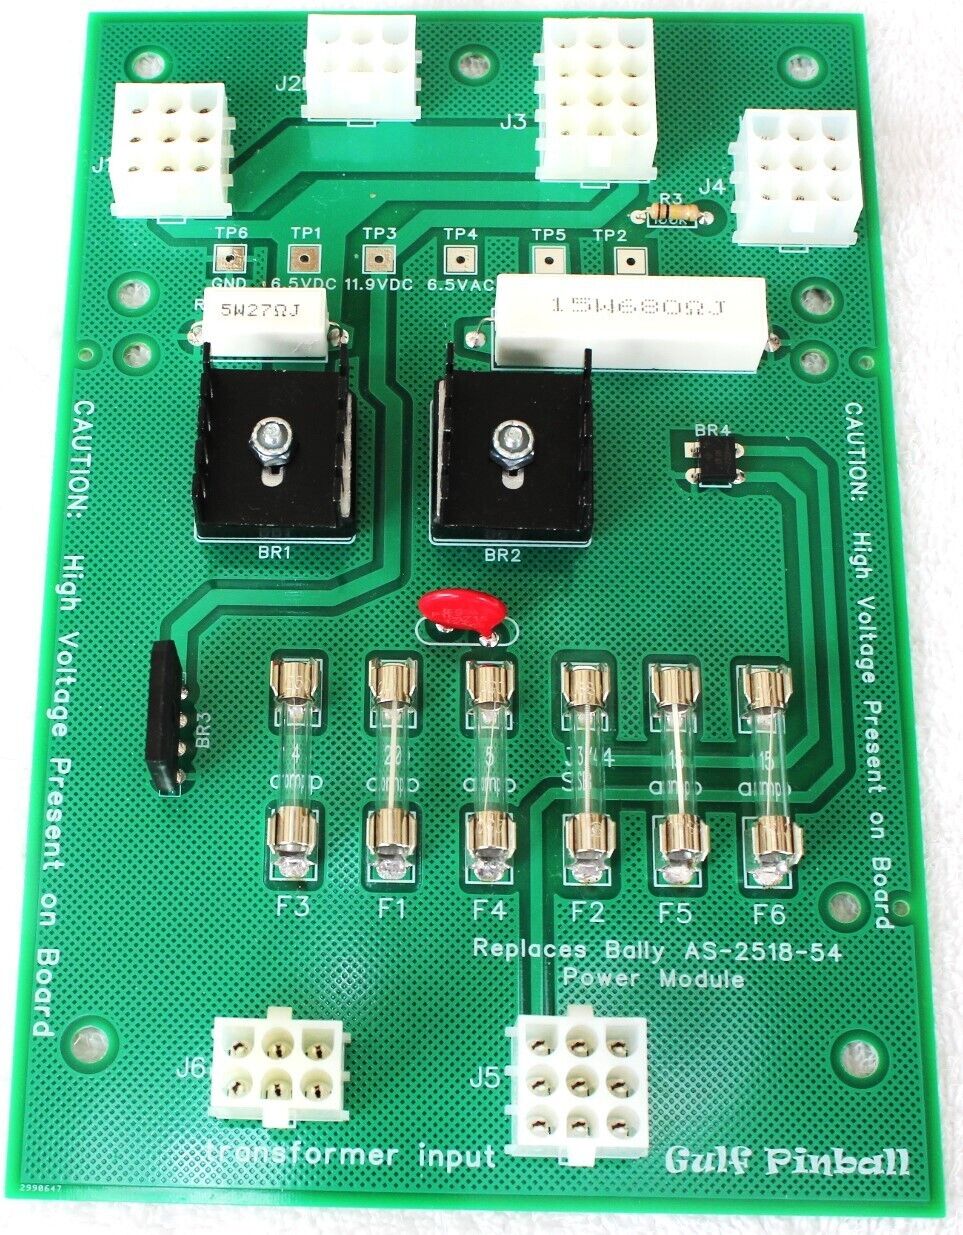 New Power Supply Rectifier Board - Bally Part AS-2518-54